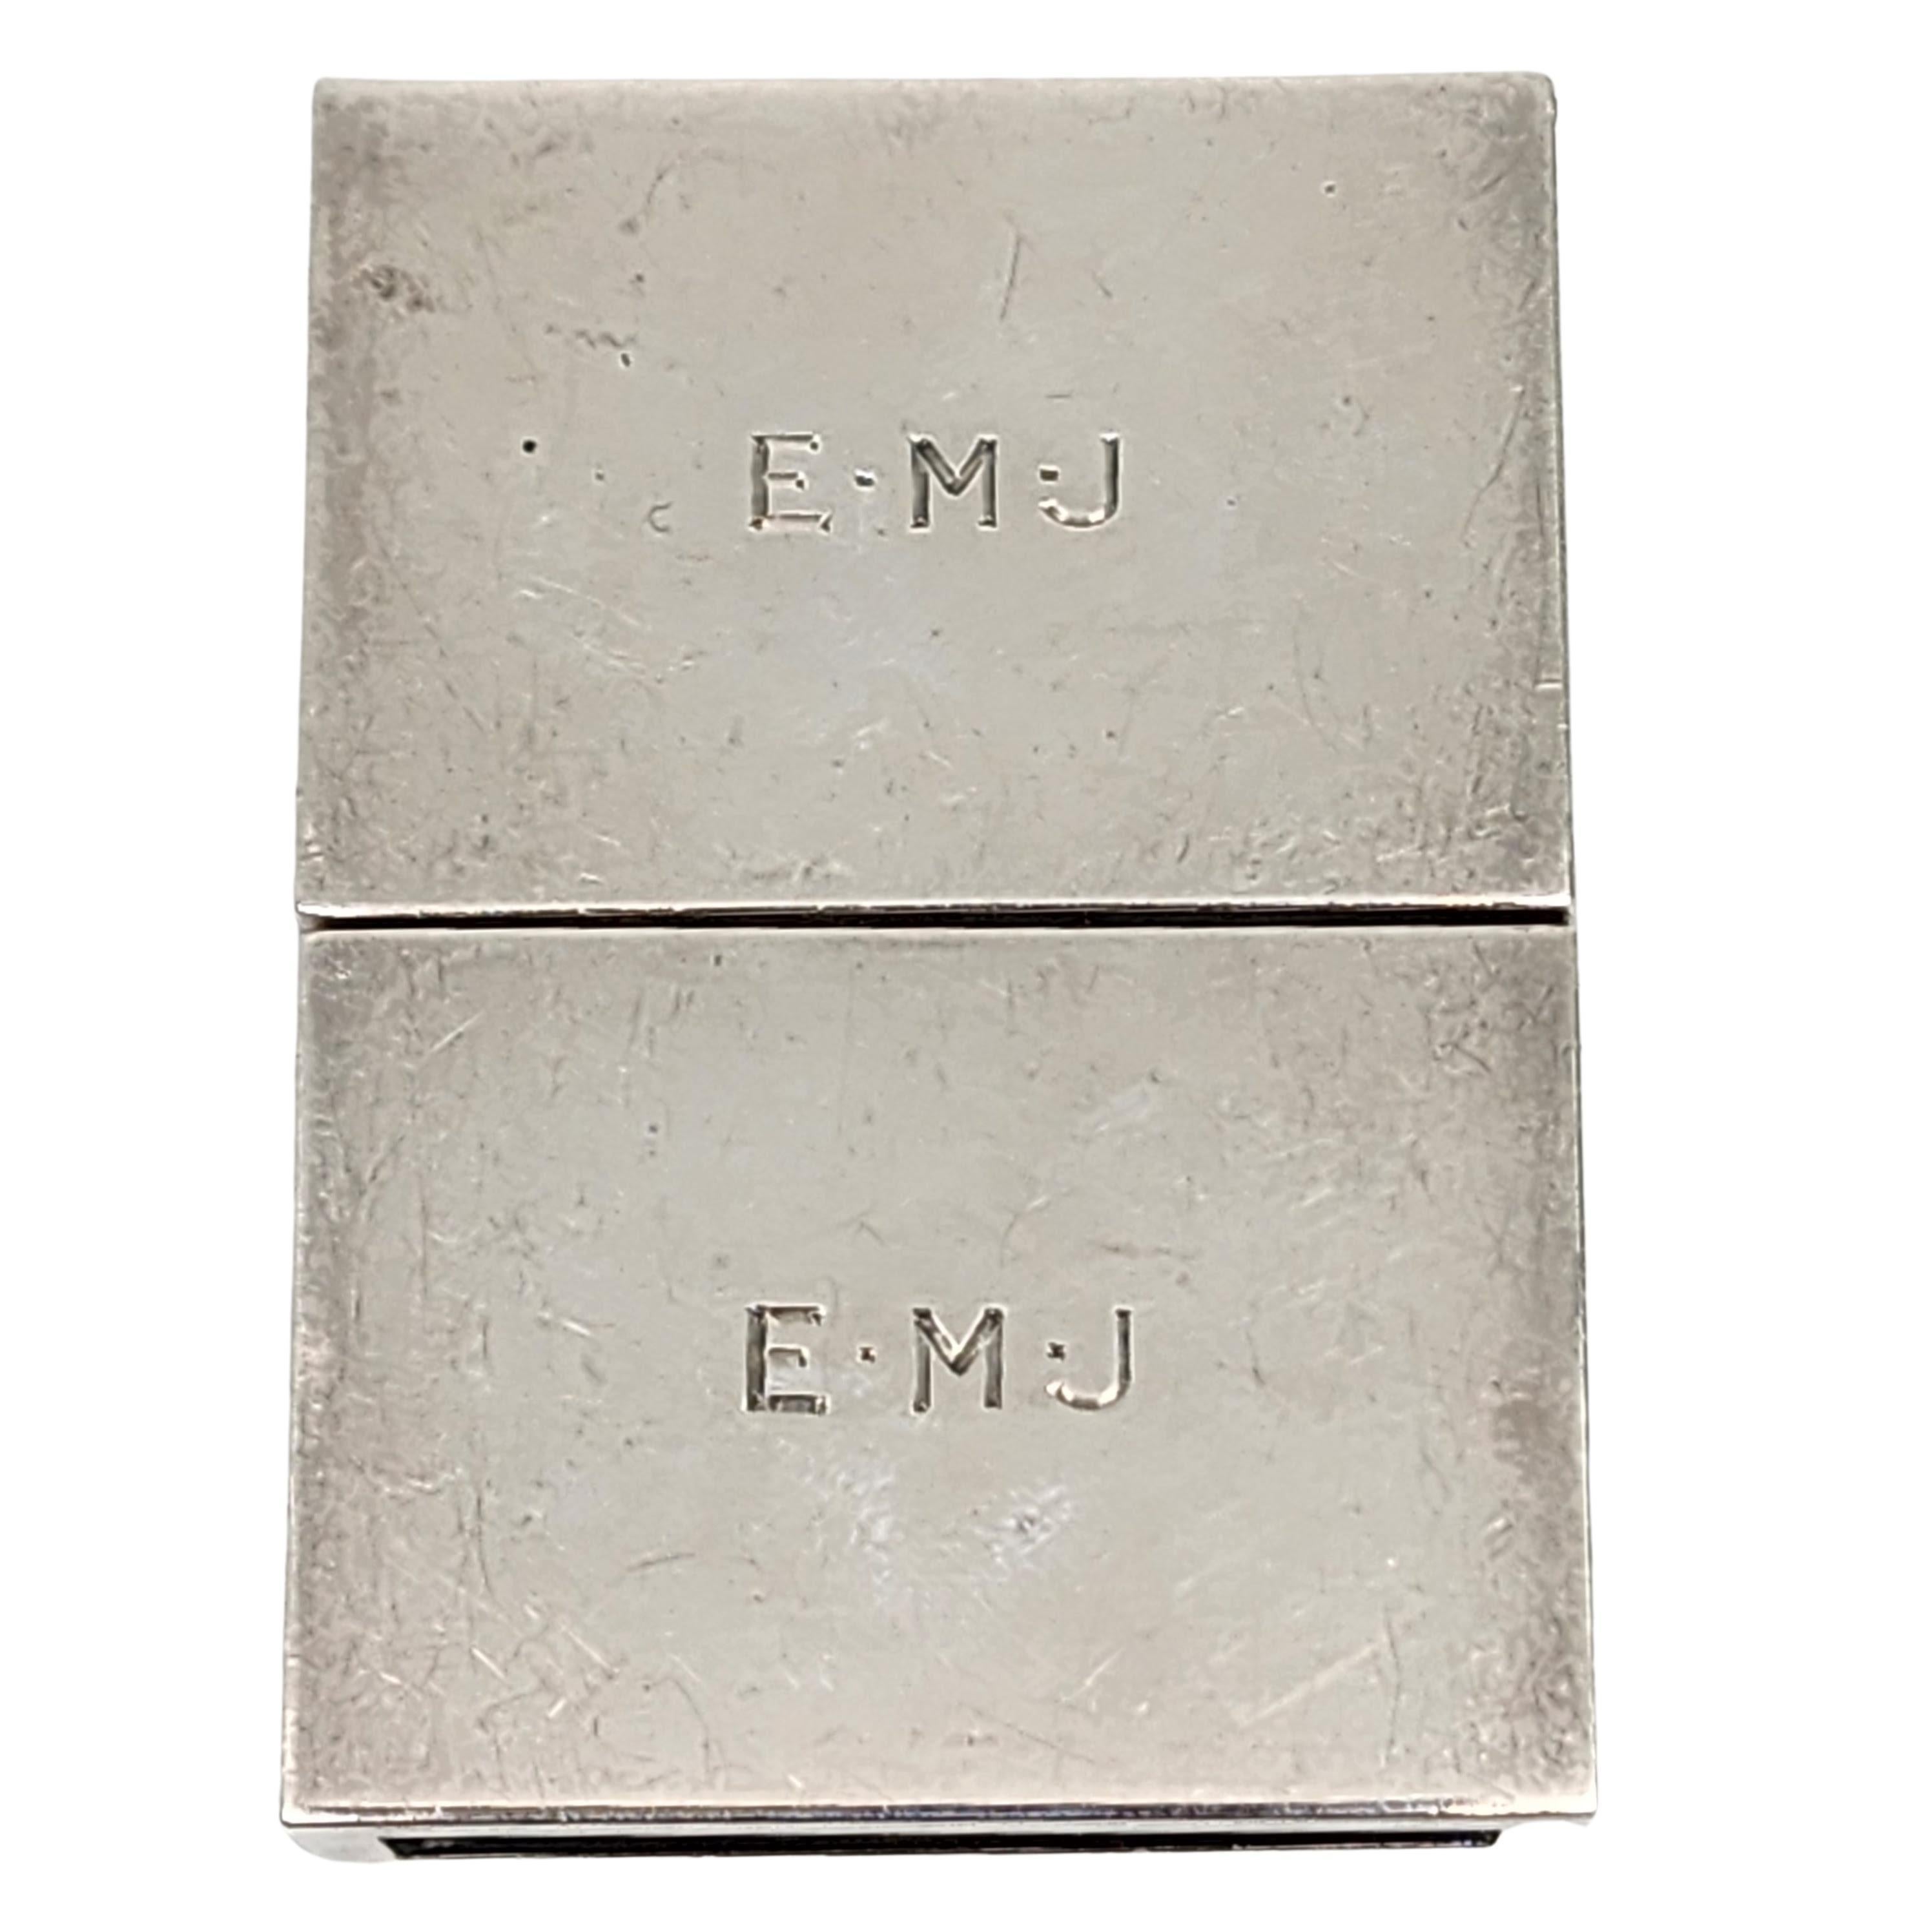 Set of 2 Tiffany & Co Sterling Silver Matchbox Covers w/Monorgam #16111 For Sale 4